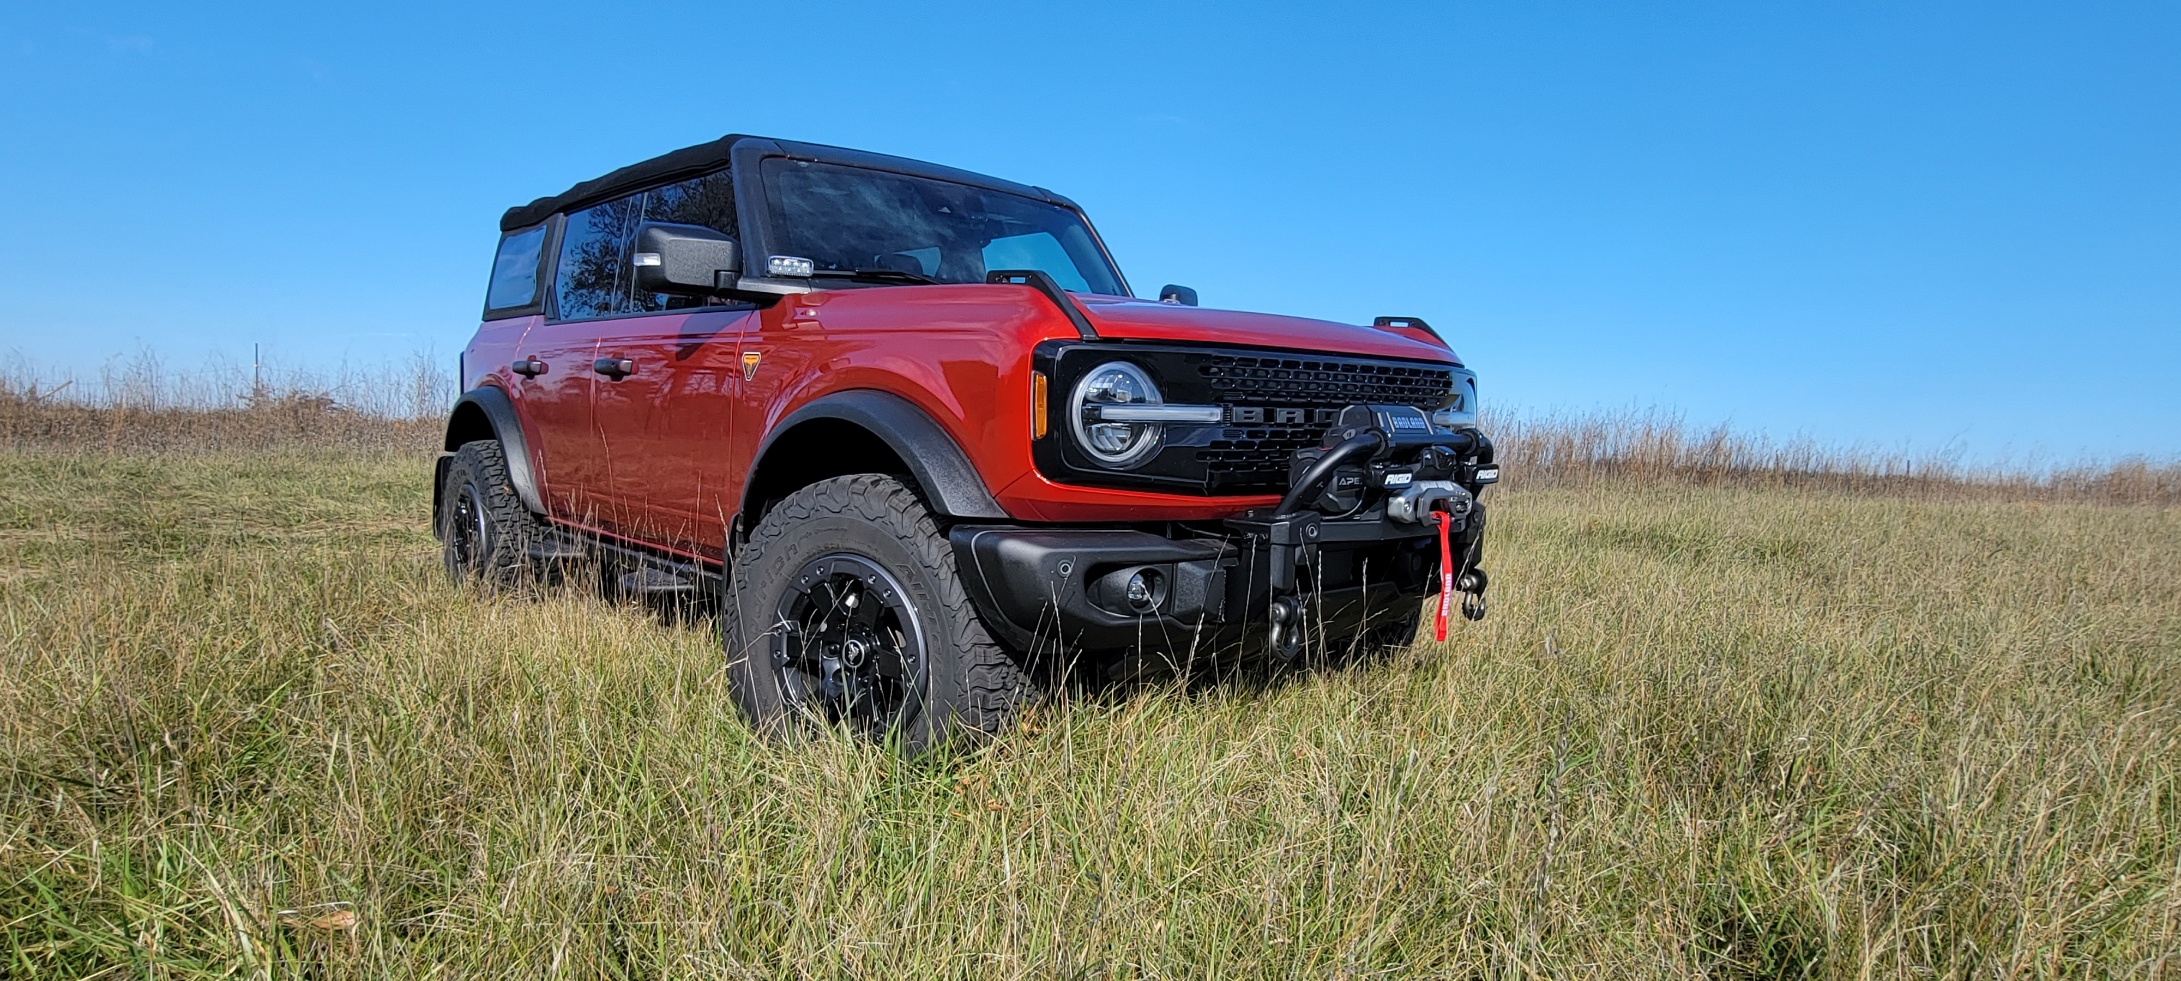 Ford Bronco High Mount Winch Plate installed on Capable Bumper 1916FD3C-D752-4890-ADD4-FE9A3B5B6D34